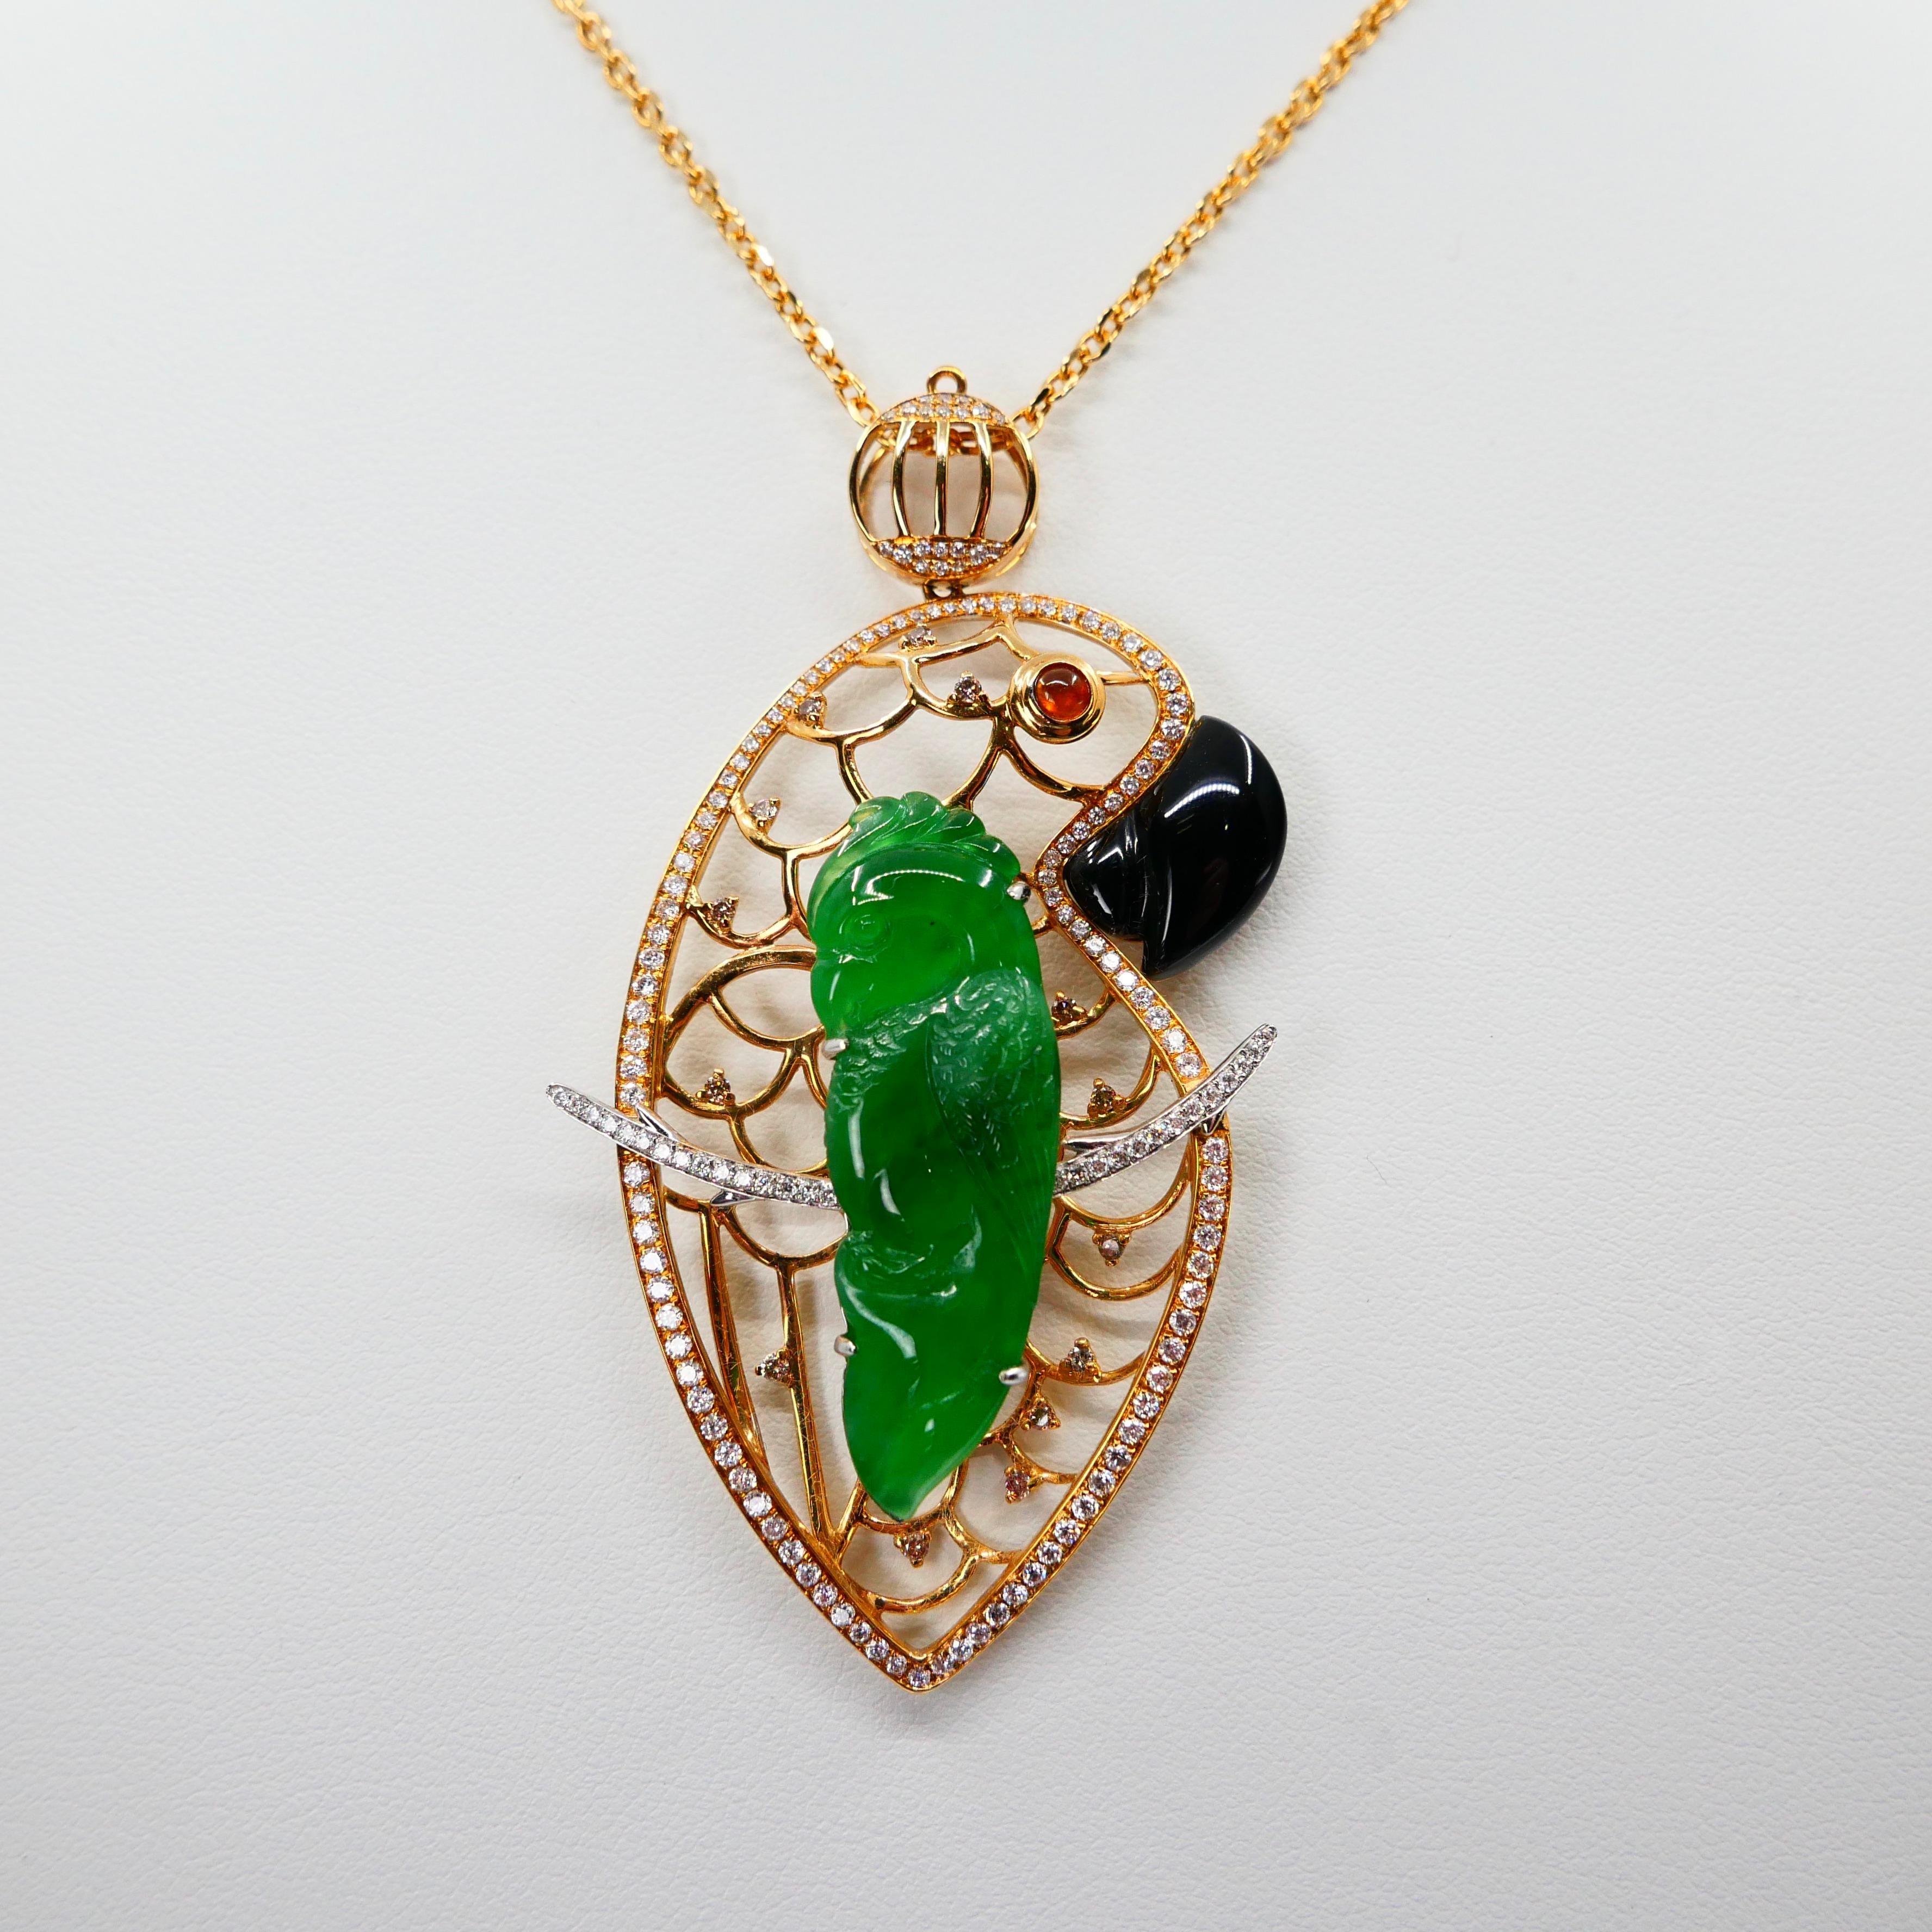 Round Cut Certified Type A Jadeite Jade and Diamond Parrot Pendant, Vivid Green Color For Sale